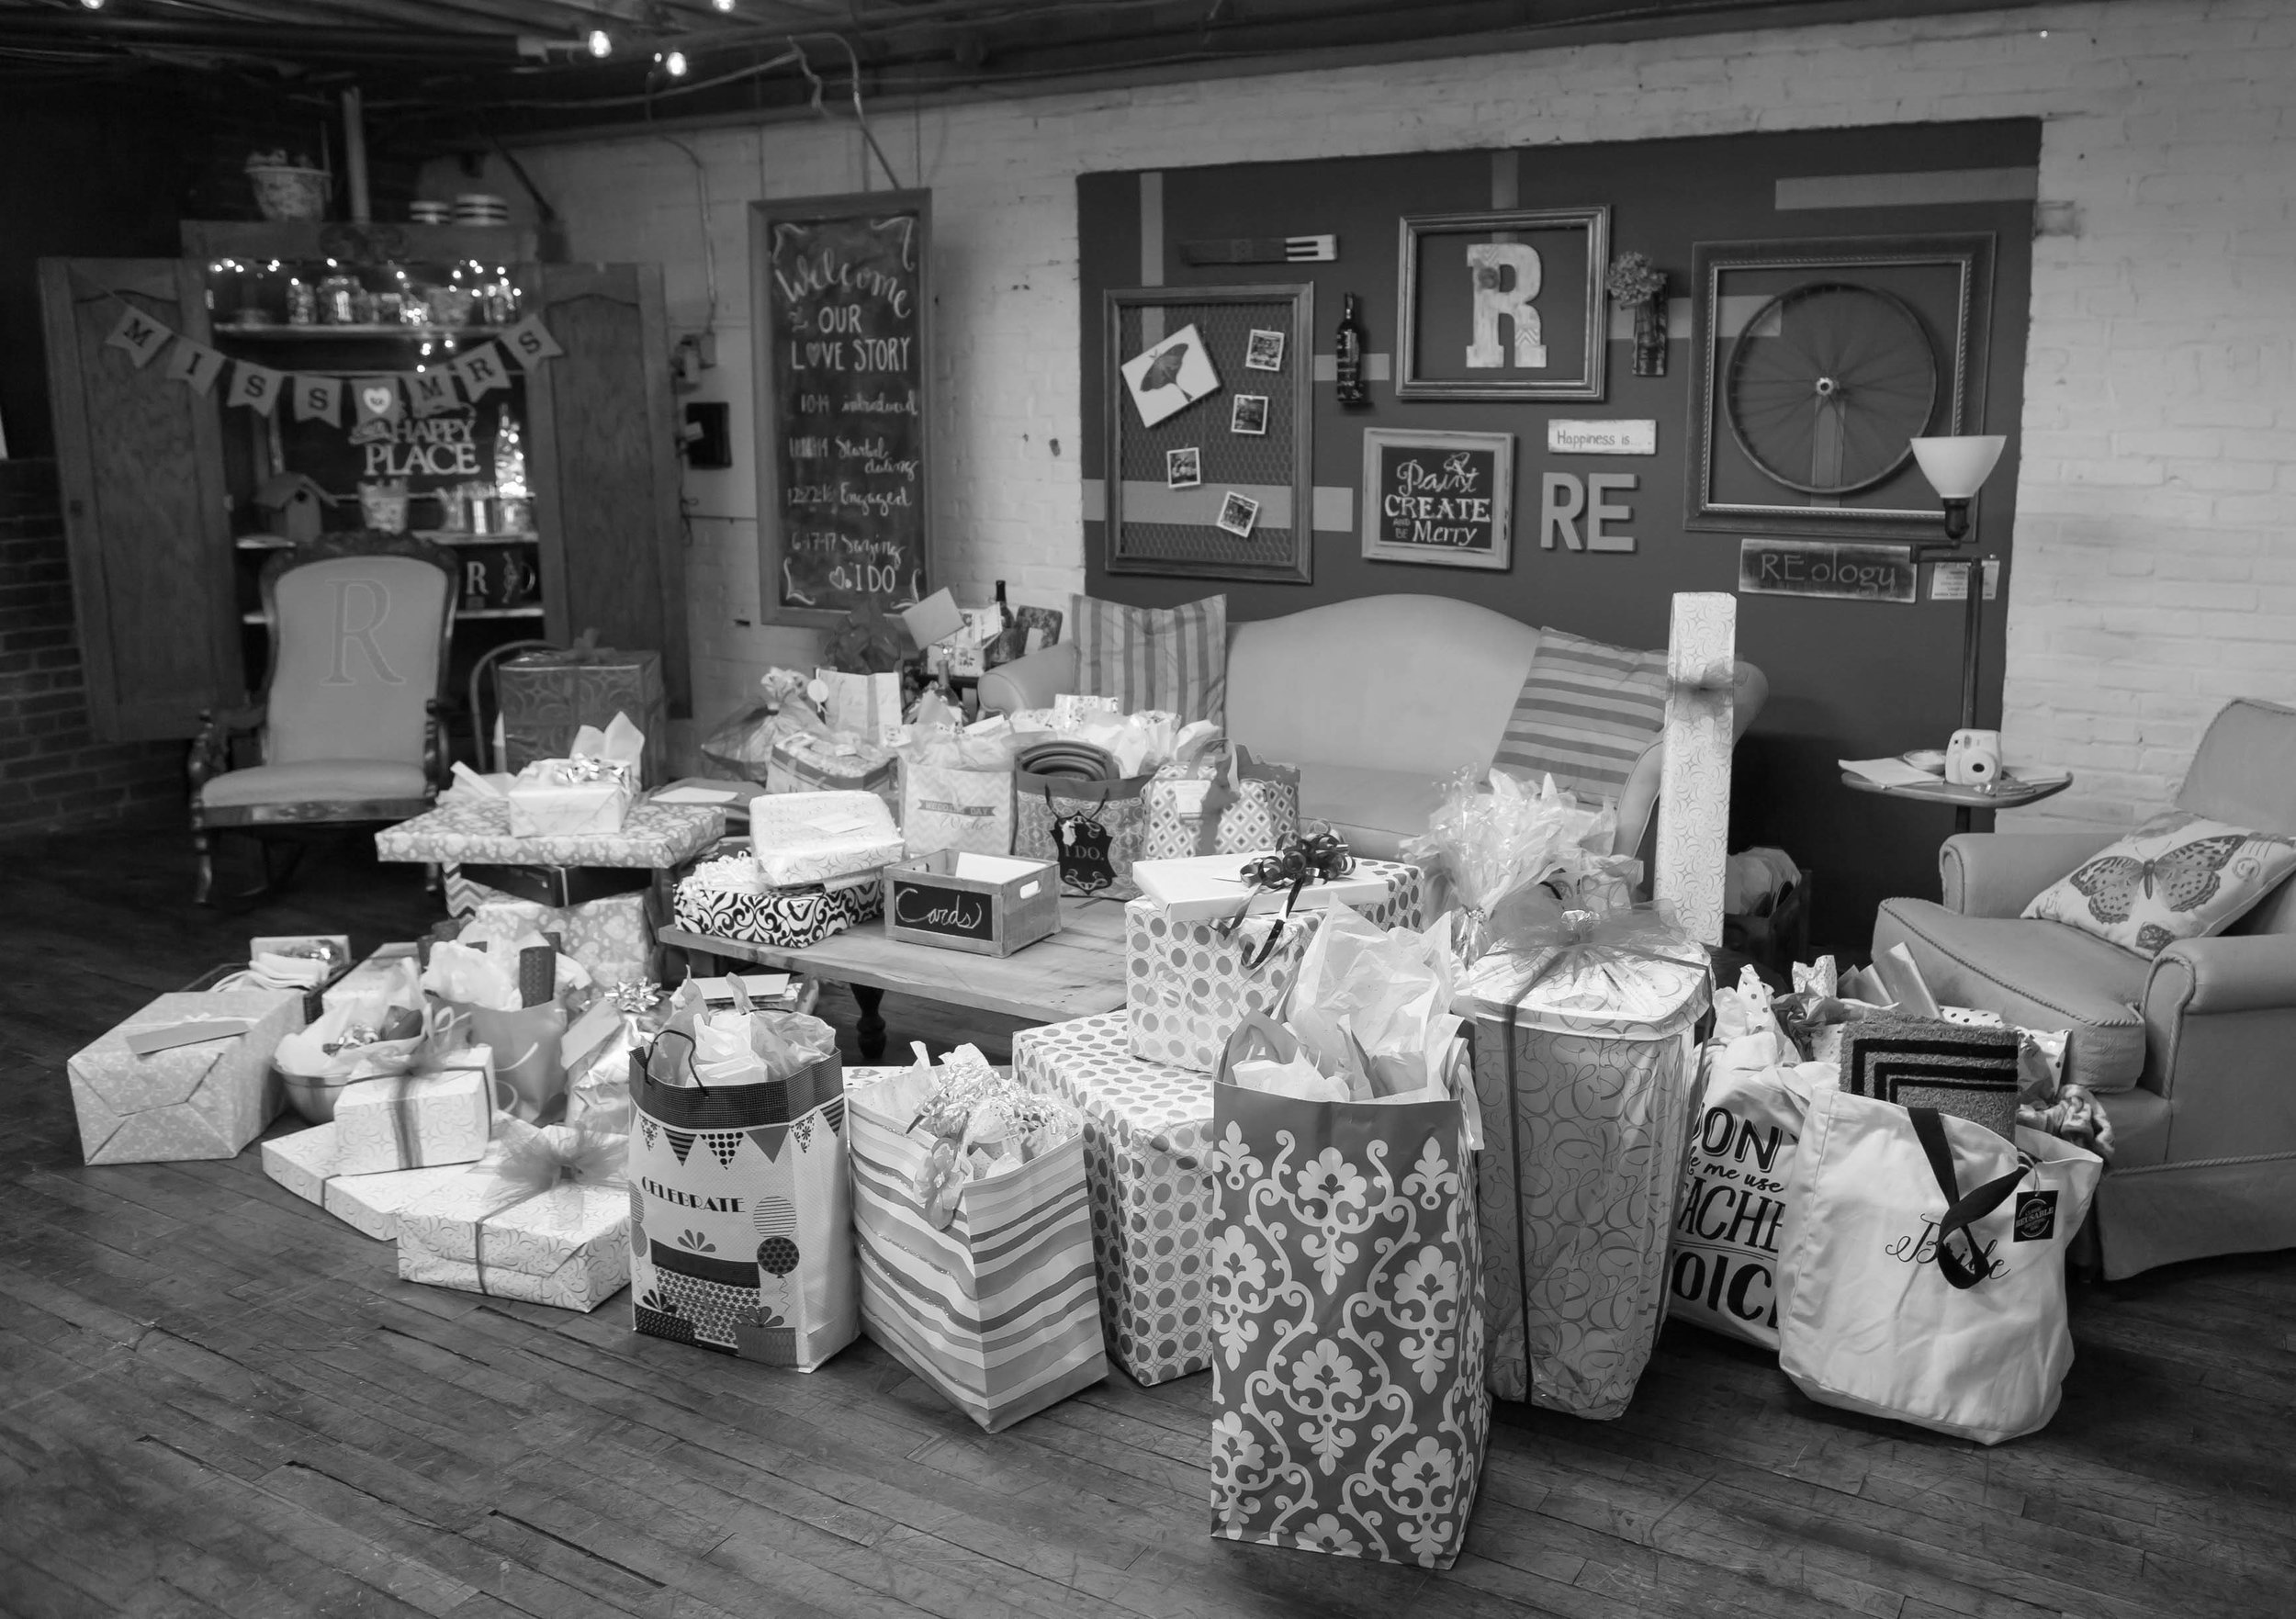 Lots-of-gifts-event-venue-reology.jpg